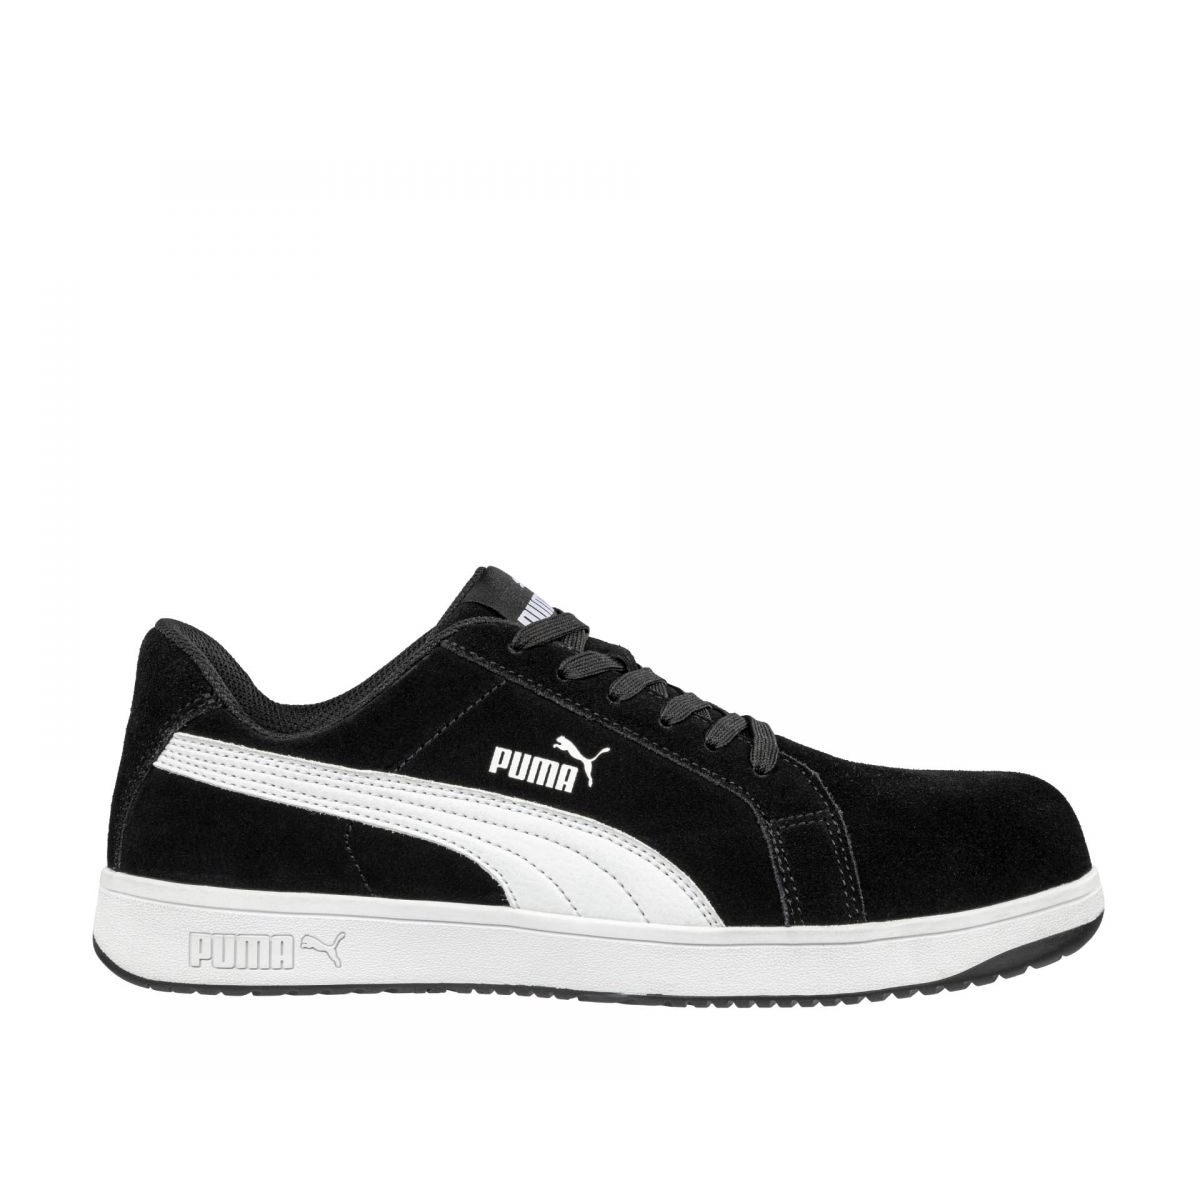 PUMA Safety Men's Iconic Low Composite Toe EH Work Shoes Black Suede - 640015 ONE SIZE BLACK - BLACK, 13